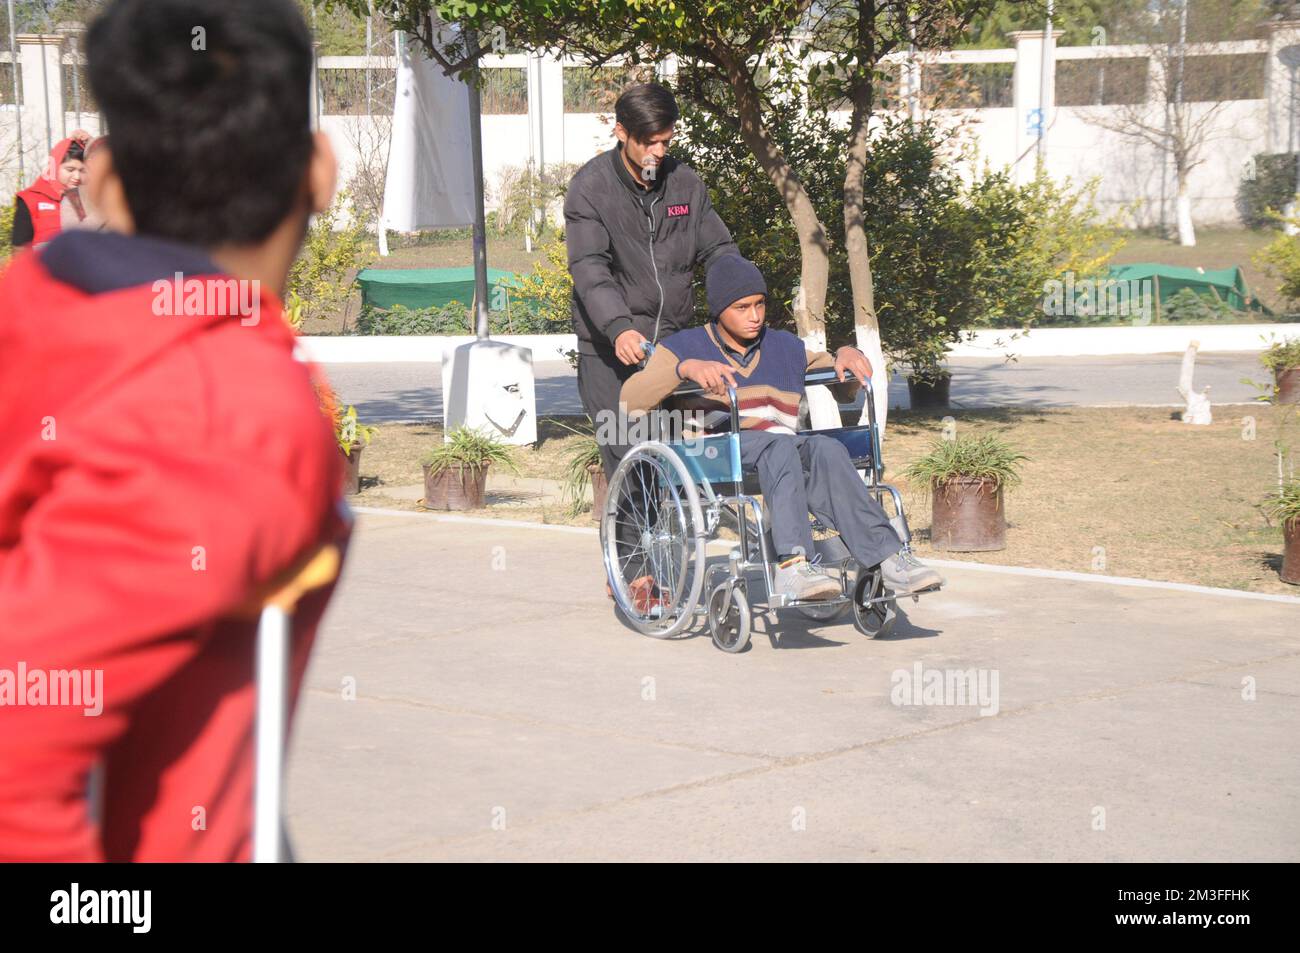 ISLAMABAD, PAKISTAN 'International Day of Persons with Disabilities' was observed around the world today, which aims to highlight the problems faced b Stock Photo